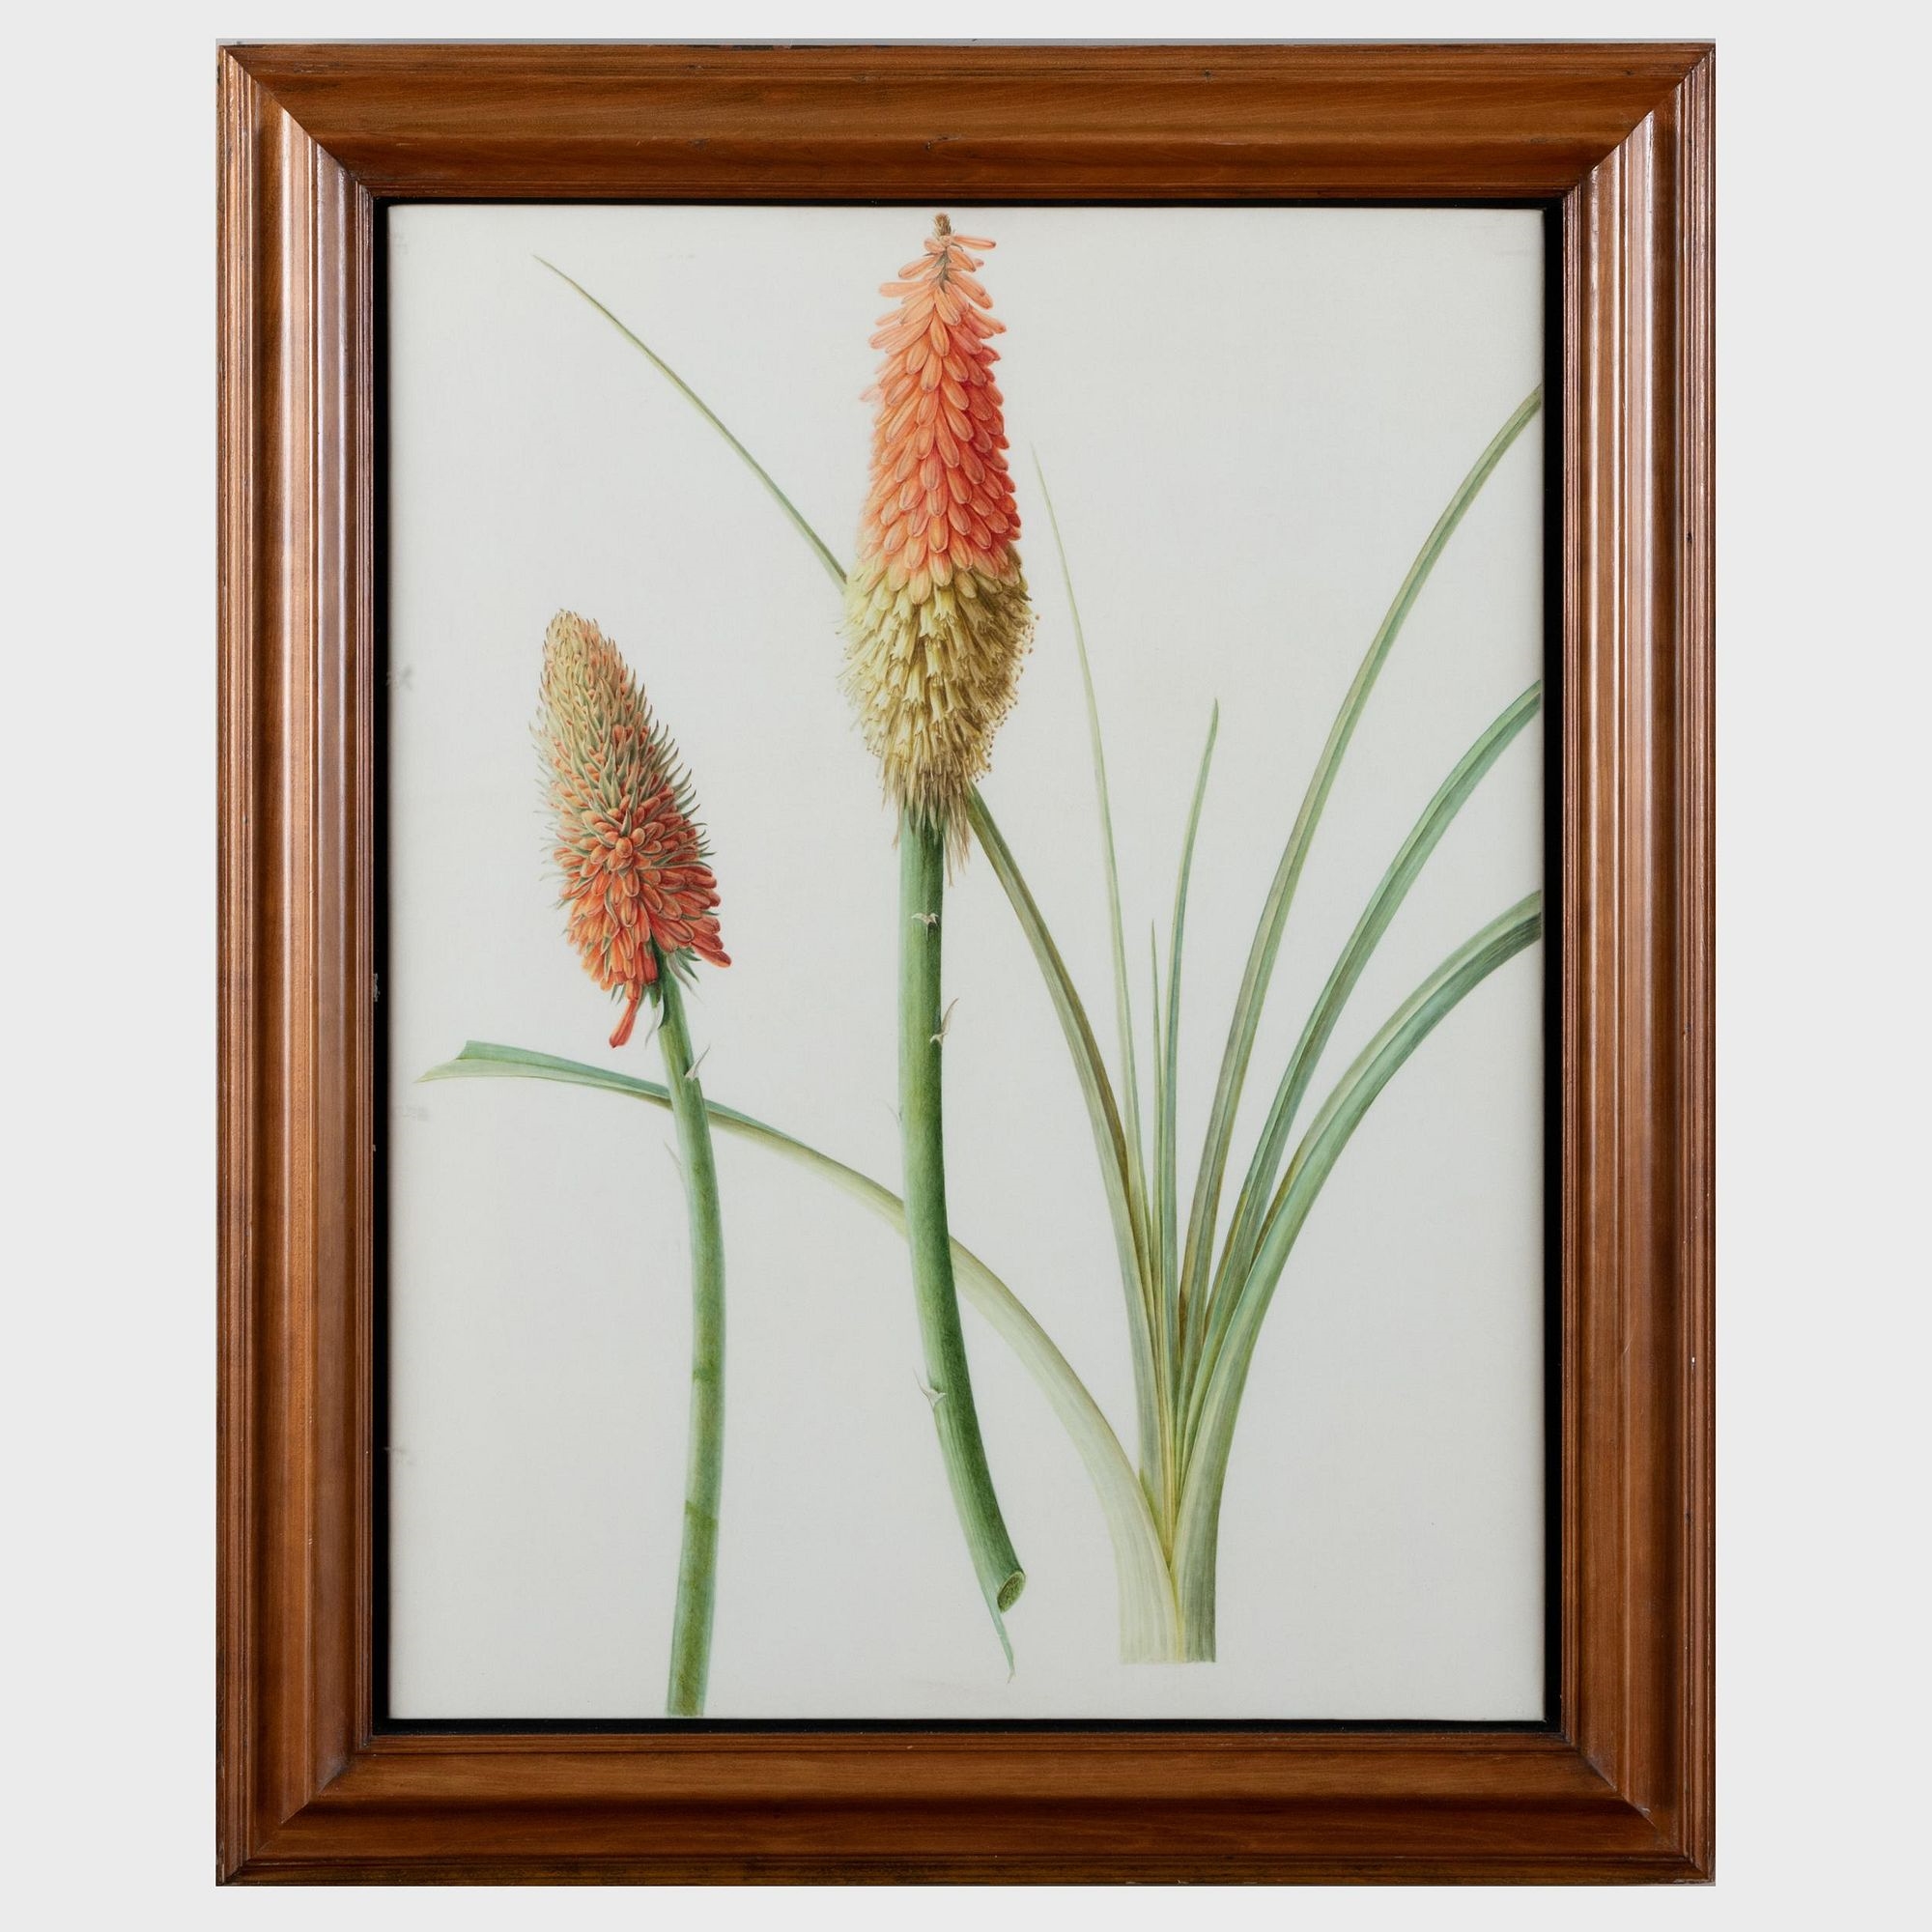 Red Hot Pokers; and Heliconia, Tjampuhan, Ubud by Brigid Edwards, 1999-2000